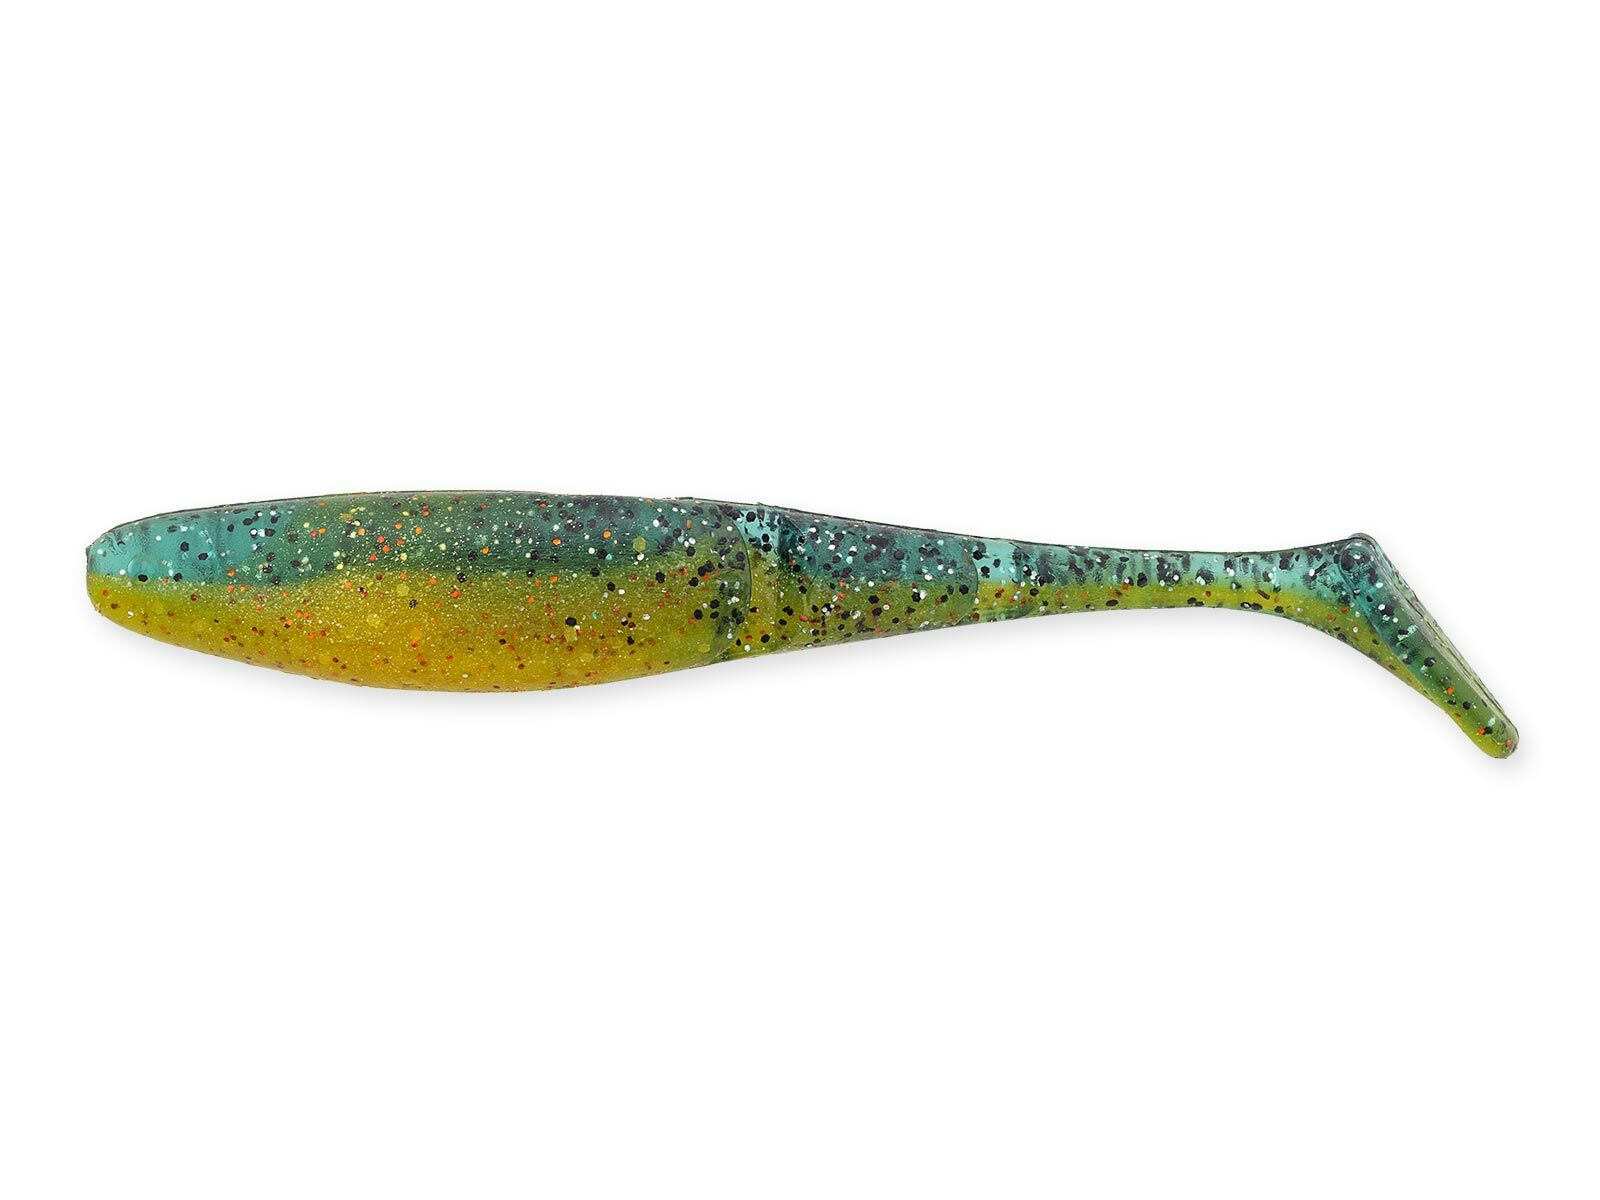 4" Scented PaddlerZ - Pro Yellow Perch